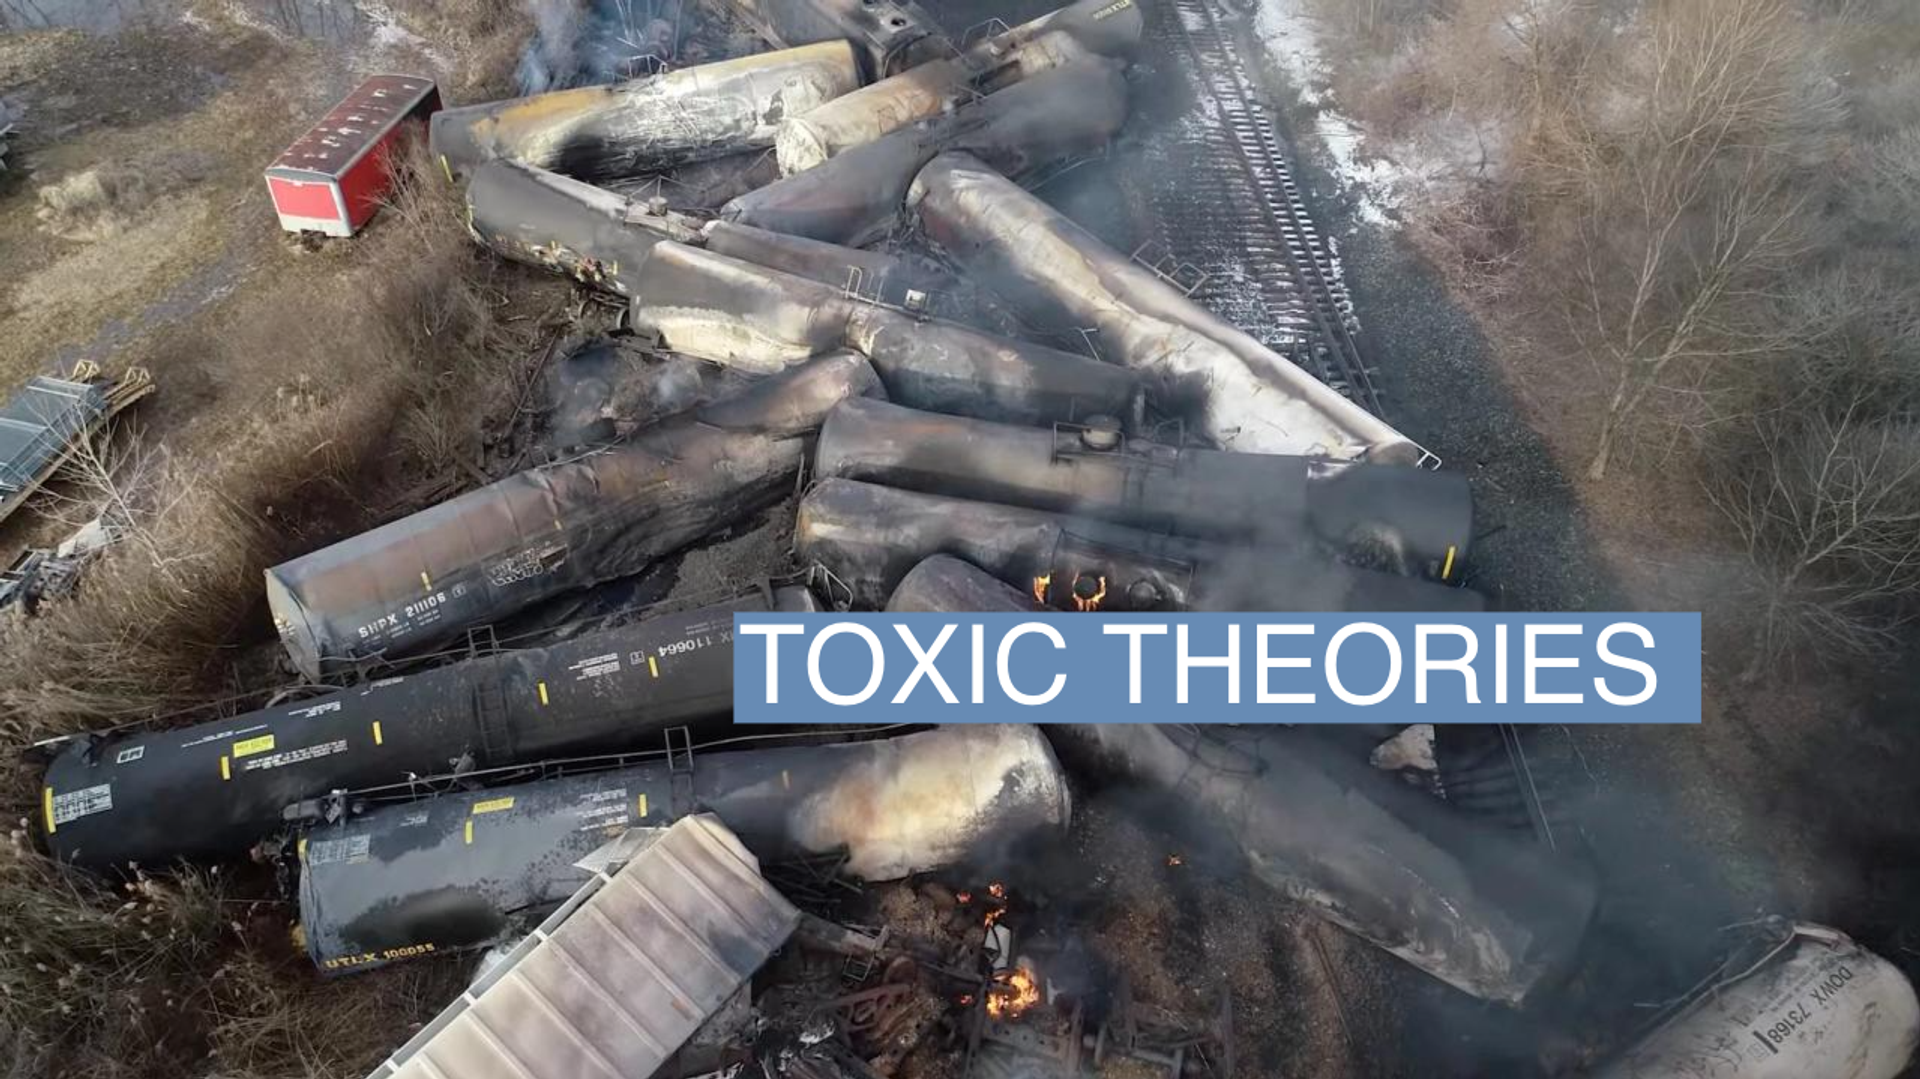 Drone footage shows the freight train derailment in East Palestine, Ohio